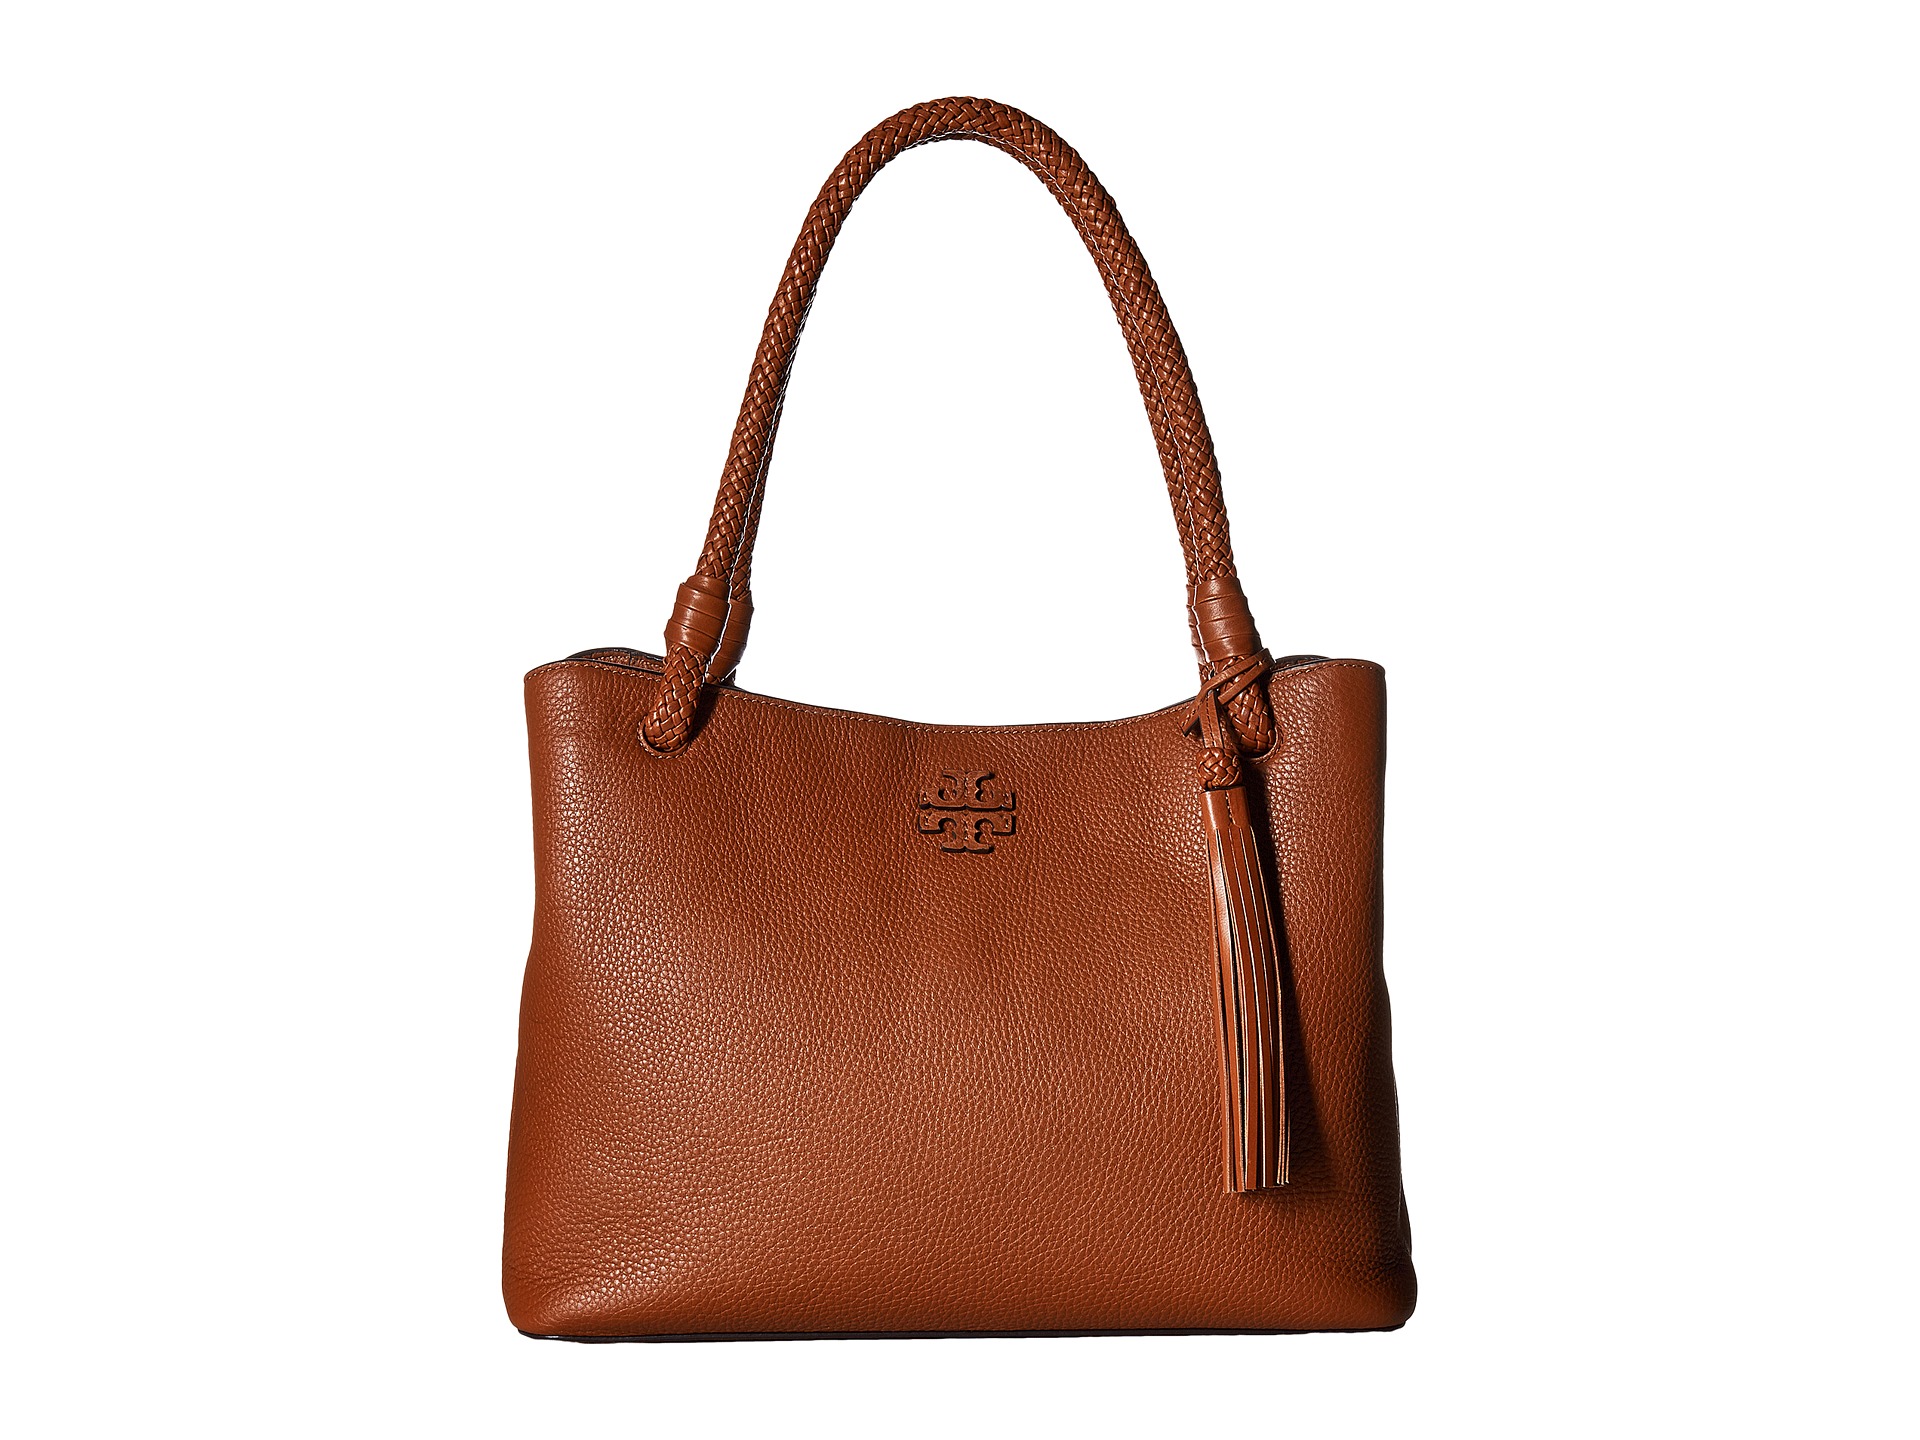 Tory Burch Taylor Triple-Compartment Tote at Zappos.com